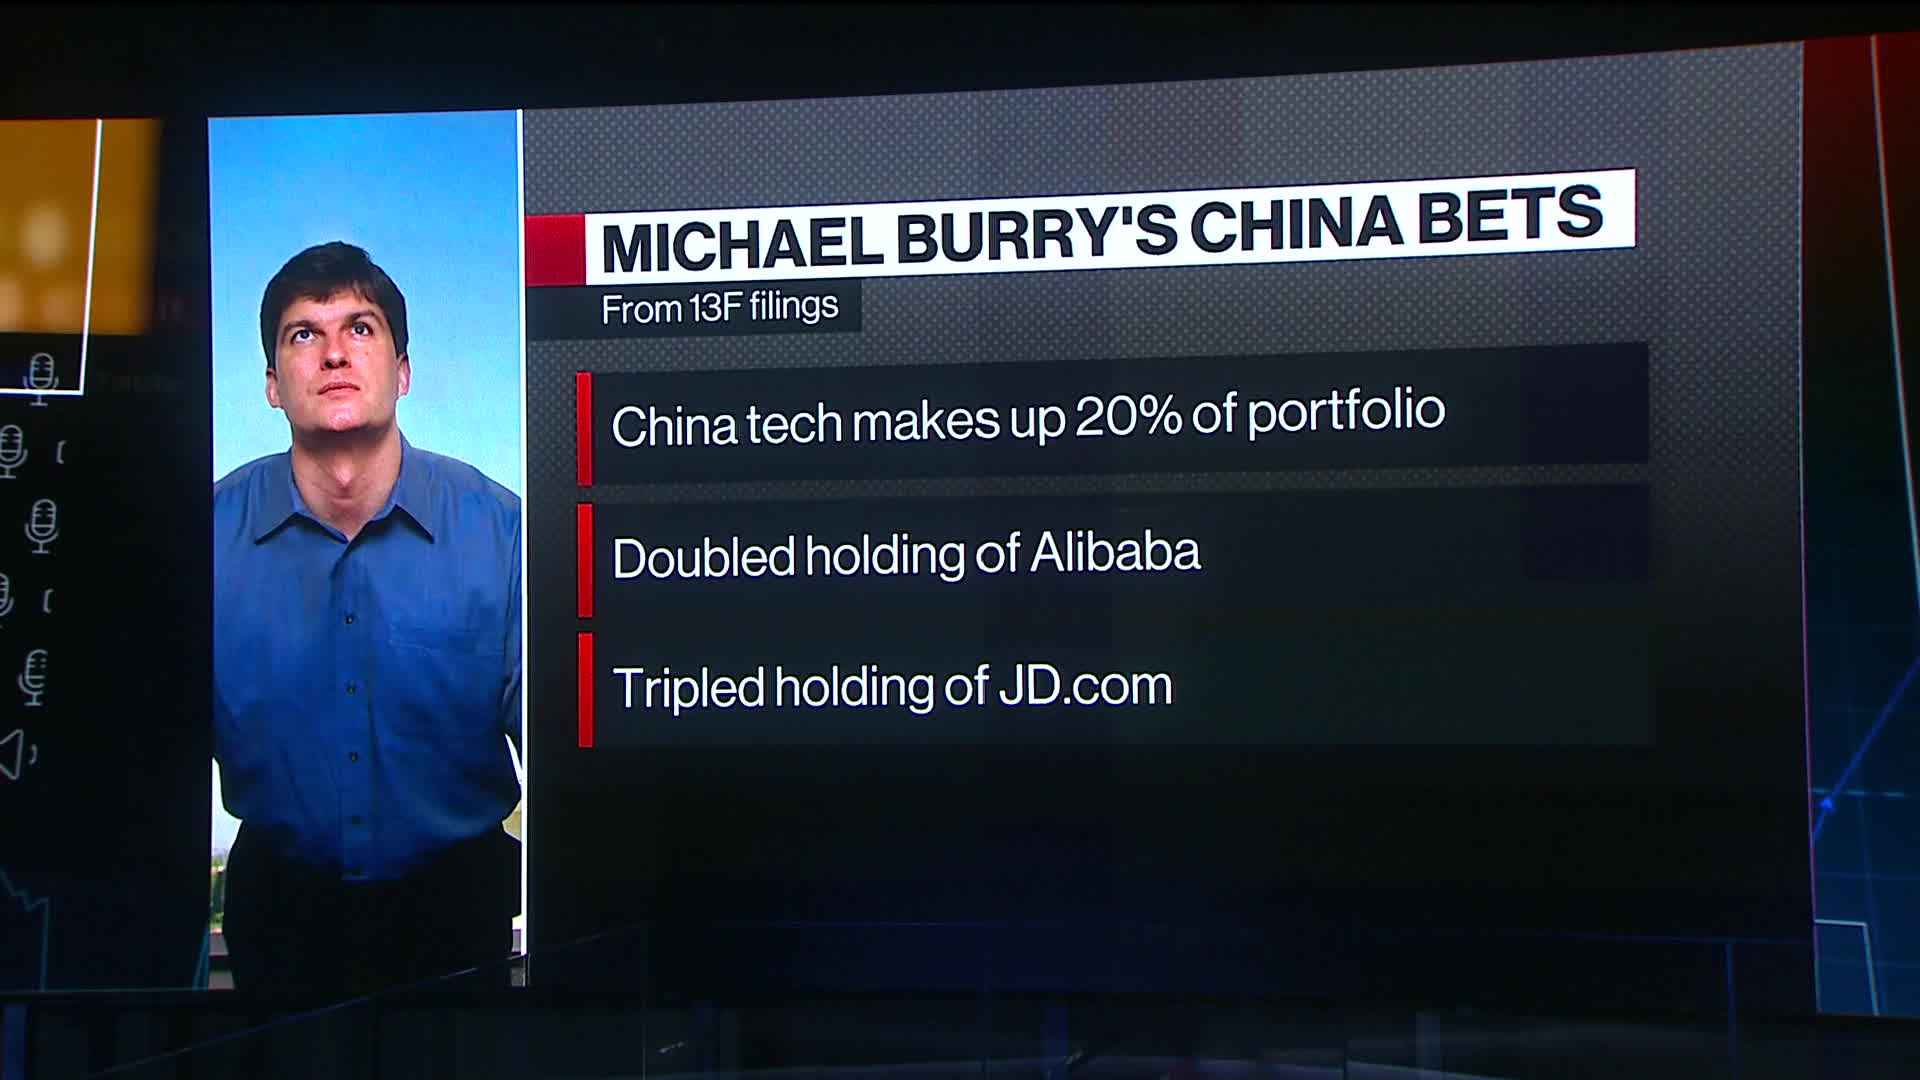 Watch Michael Burry Doubles Alibaba Stake 13F Filings Bloomberg